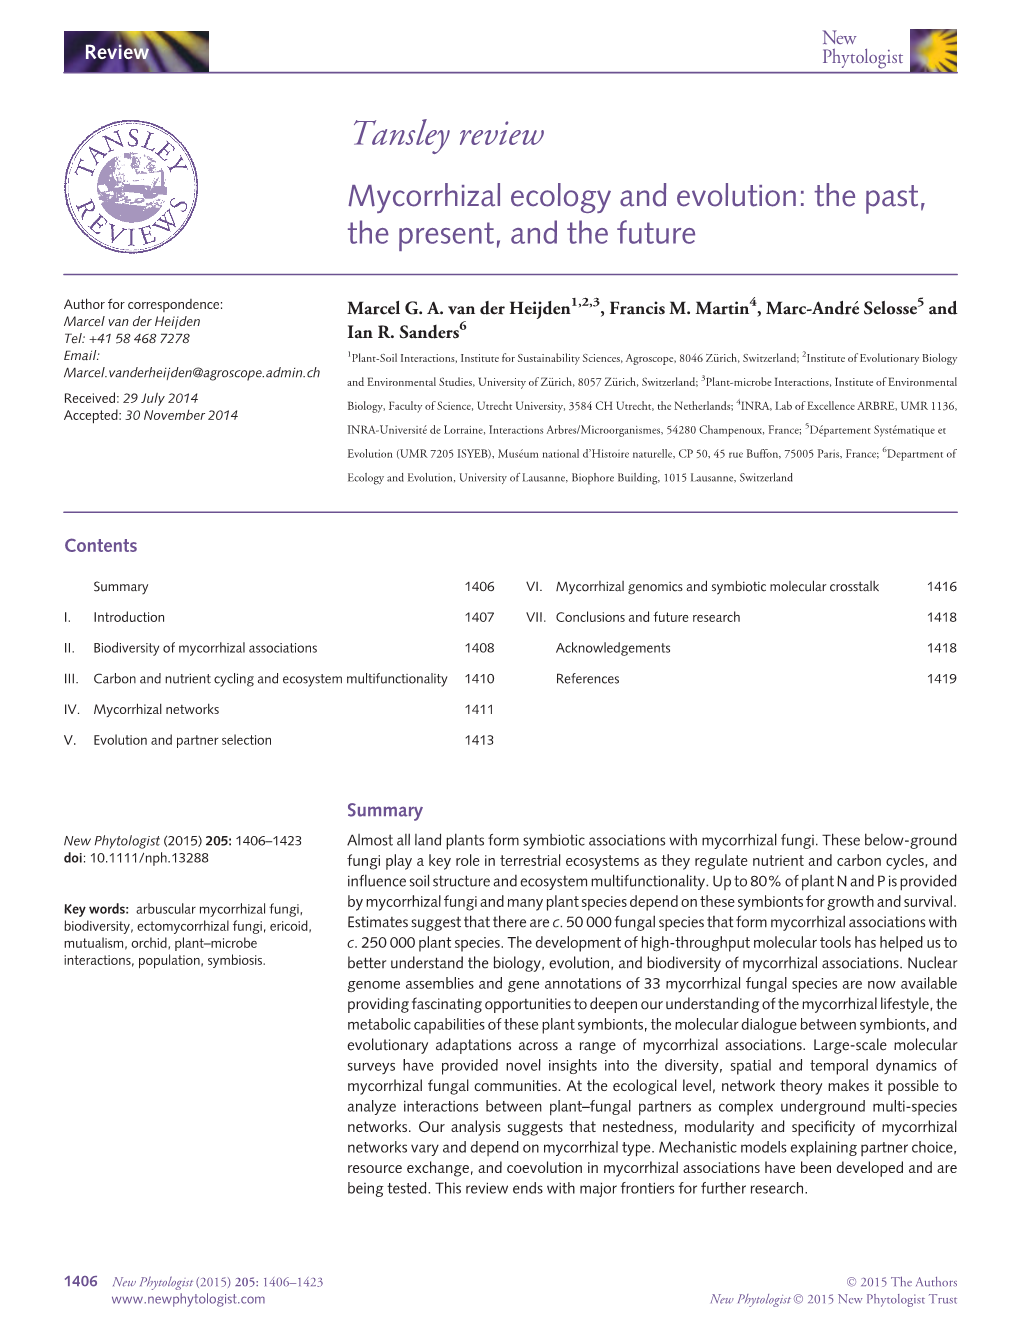 Tansley Review Mycorrhizal Ecology and Evolution: the Past, the Present, and the Future